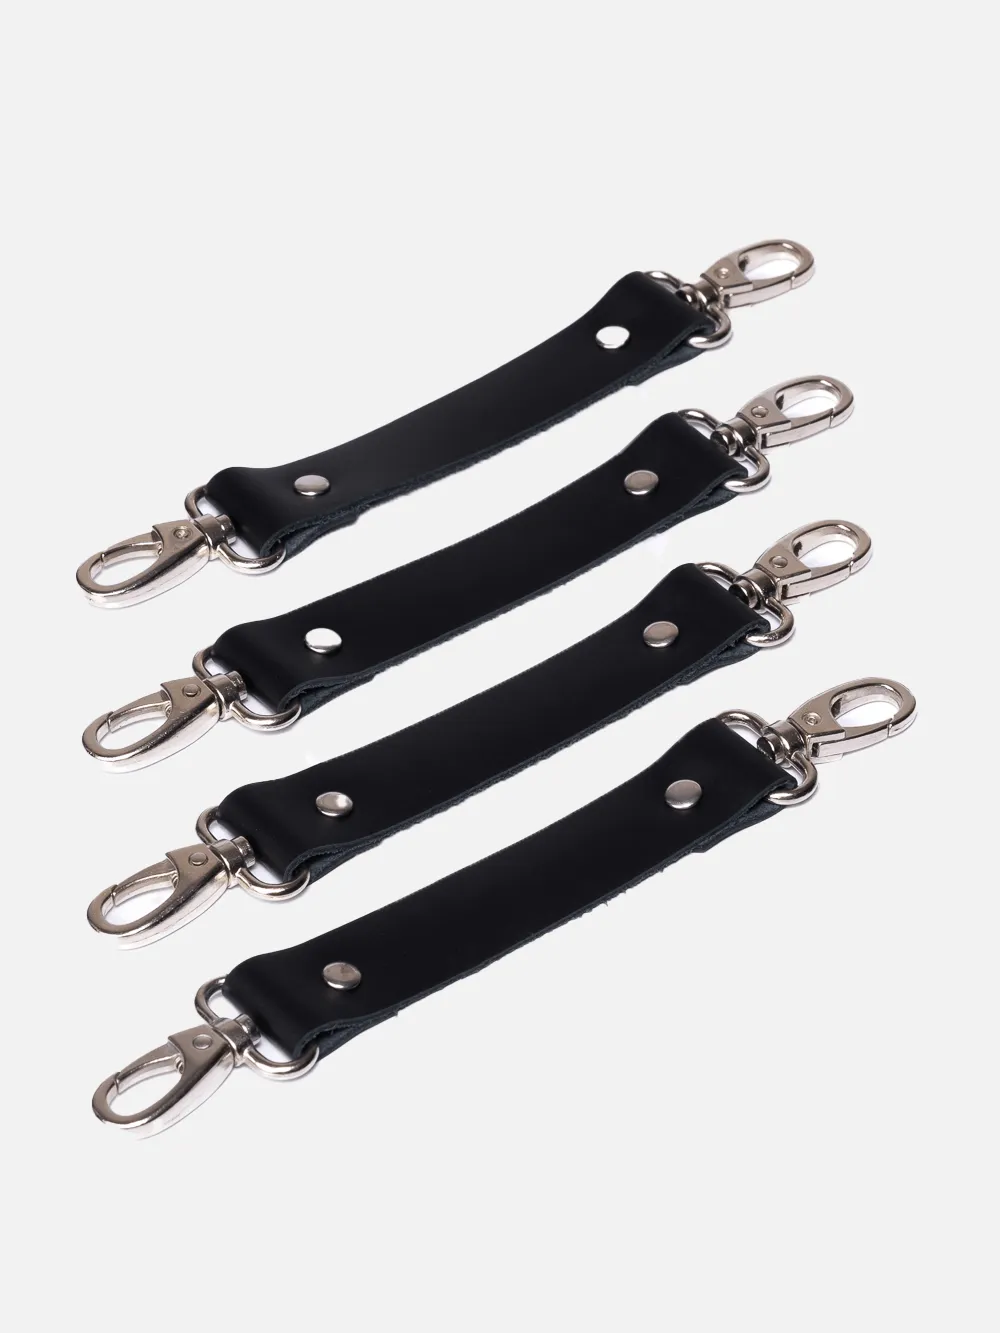 Leather strap - fastener with 2 carabiners for tying and fastening handcuffs and other BDSM and fetish accessories and harnesses.